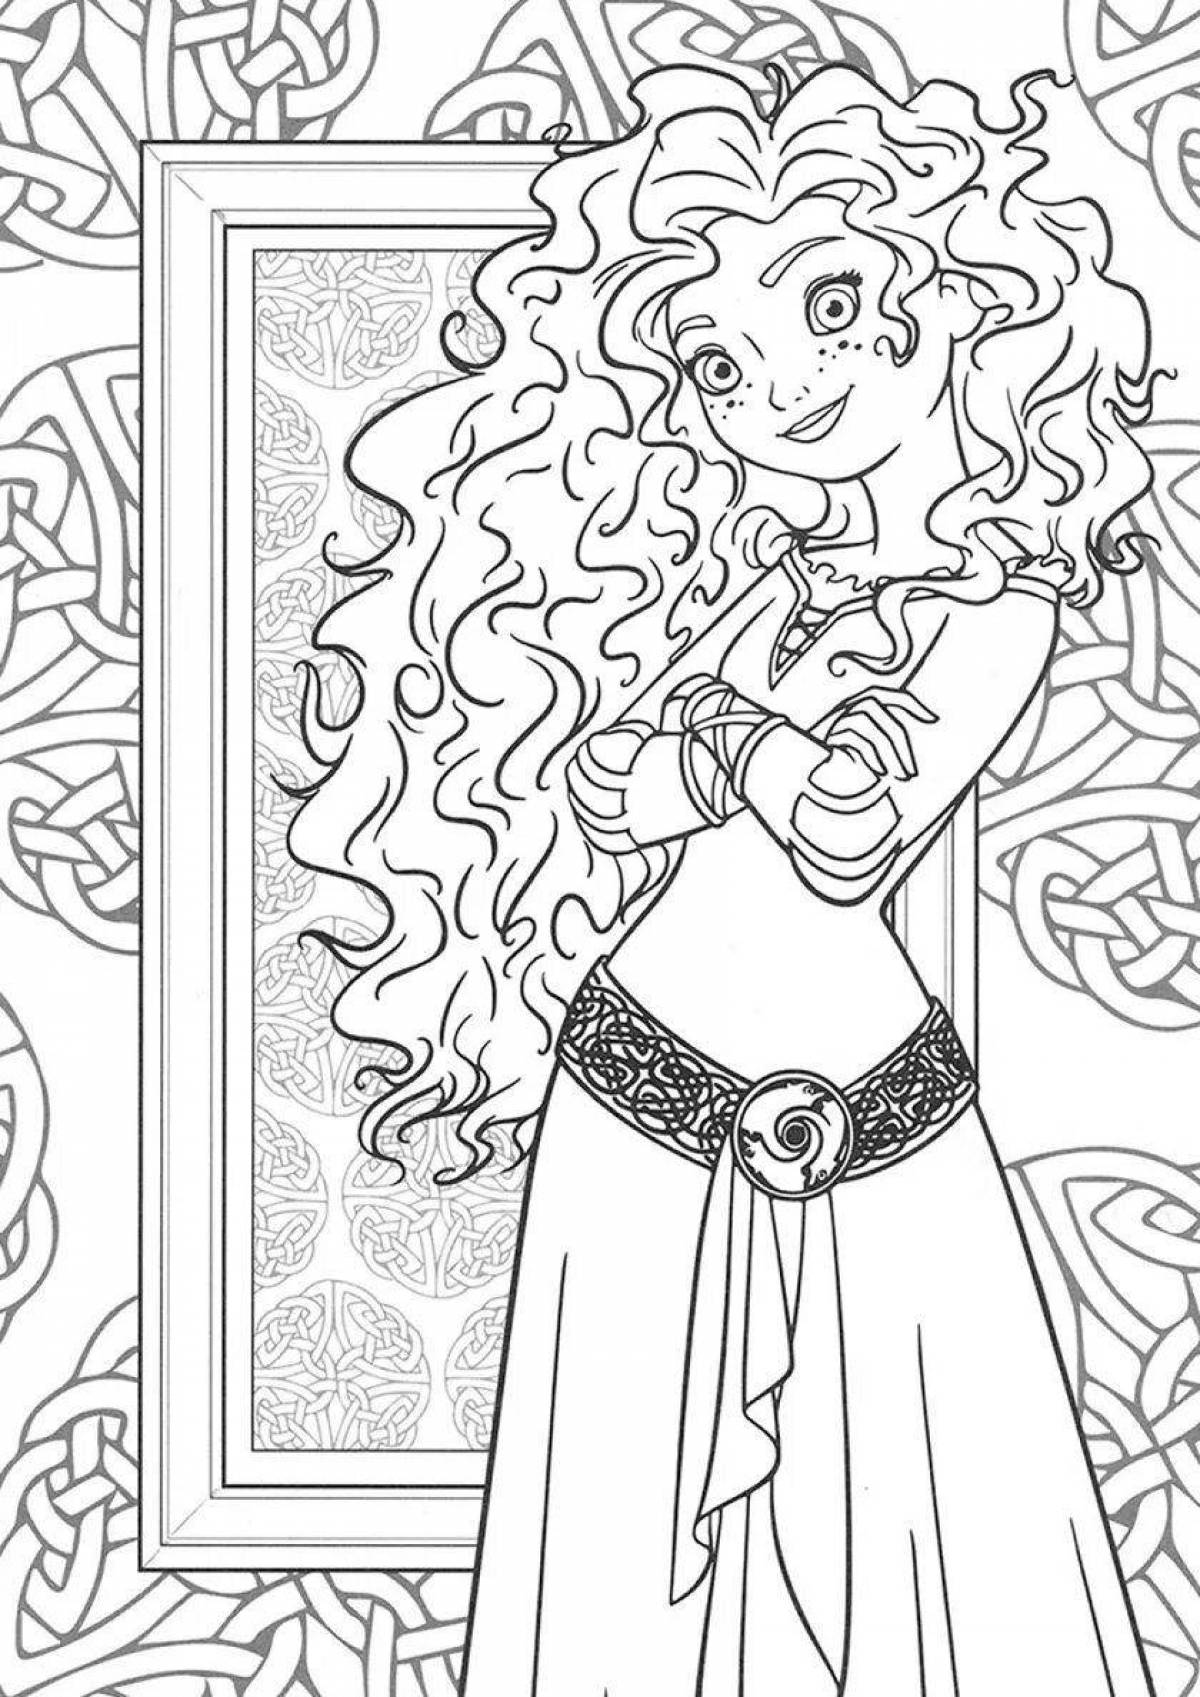 Marvelous coloring page brave heart merida